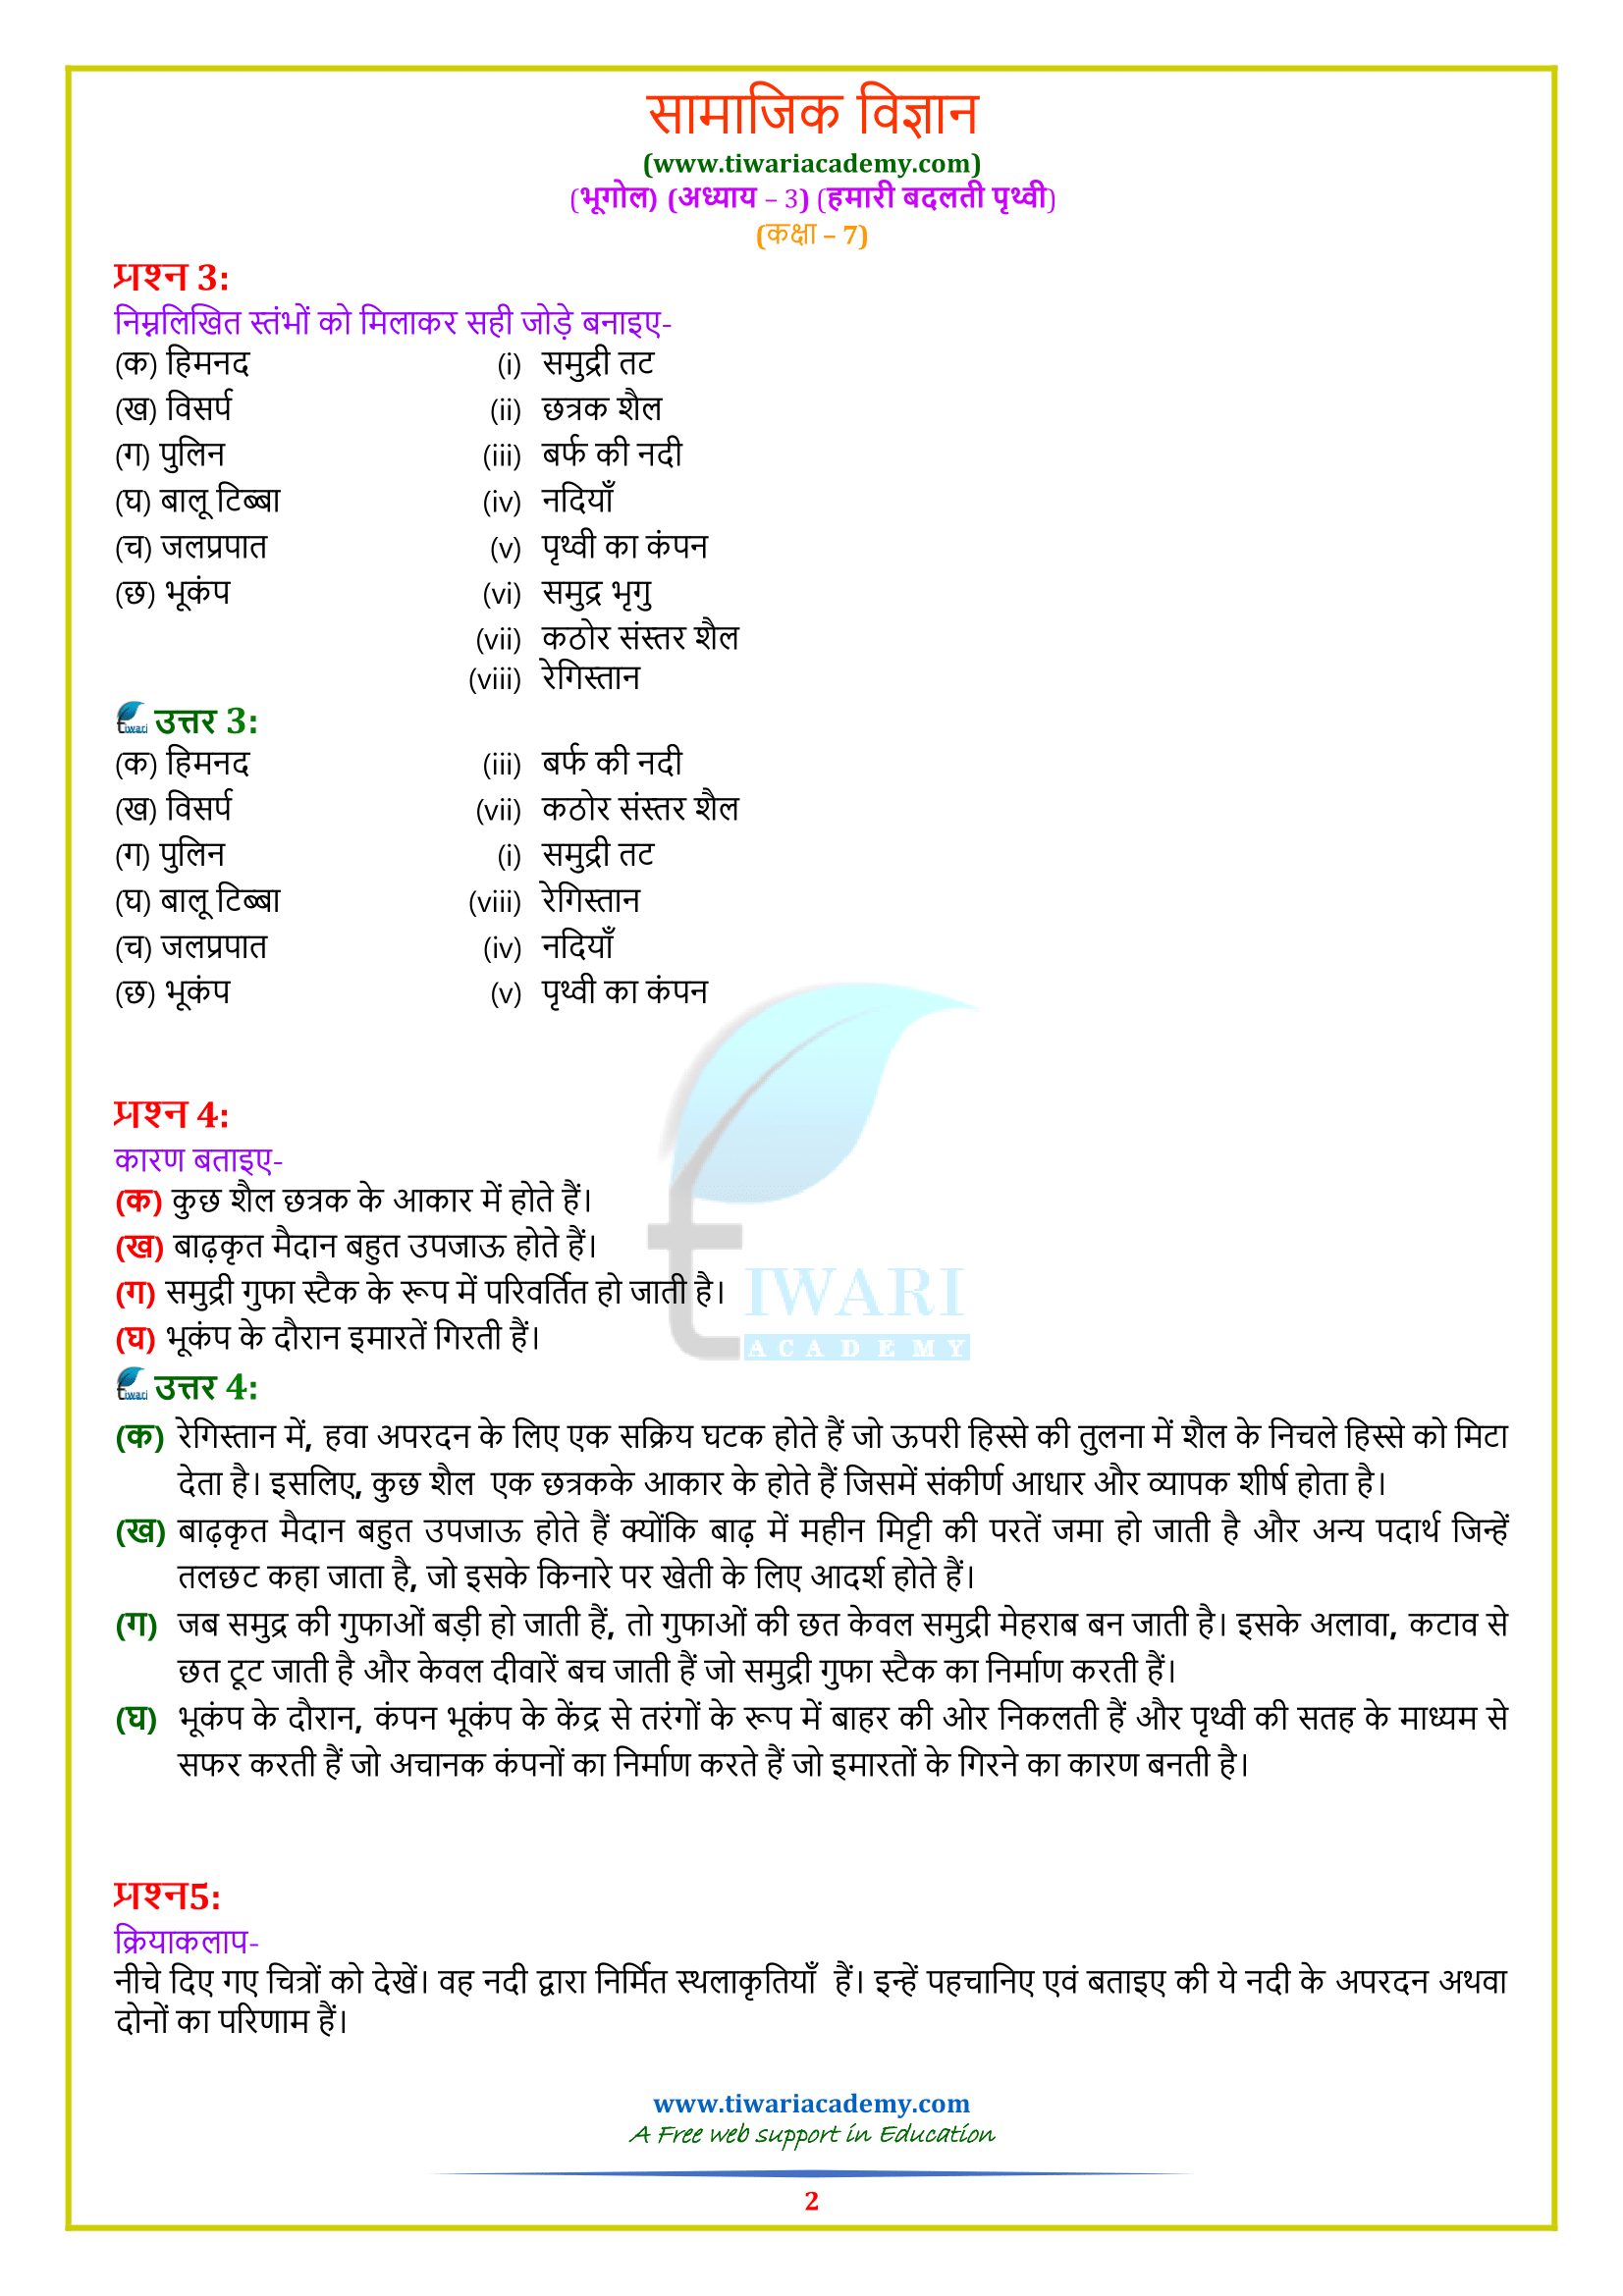 NCERT Solutions for class 7 Geography chapter 3 in Hindi Medium